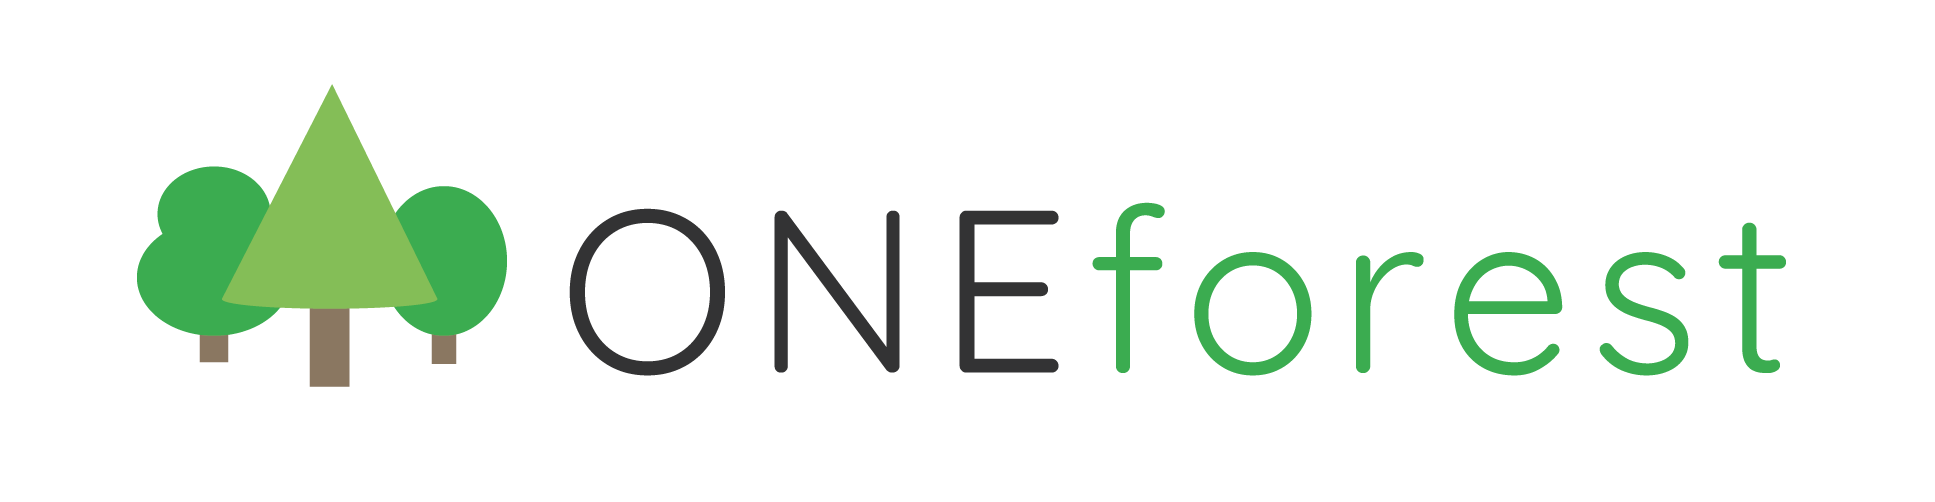 ONEforest